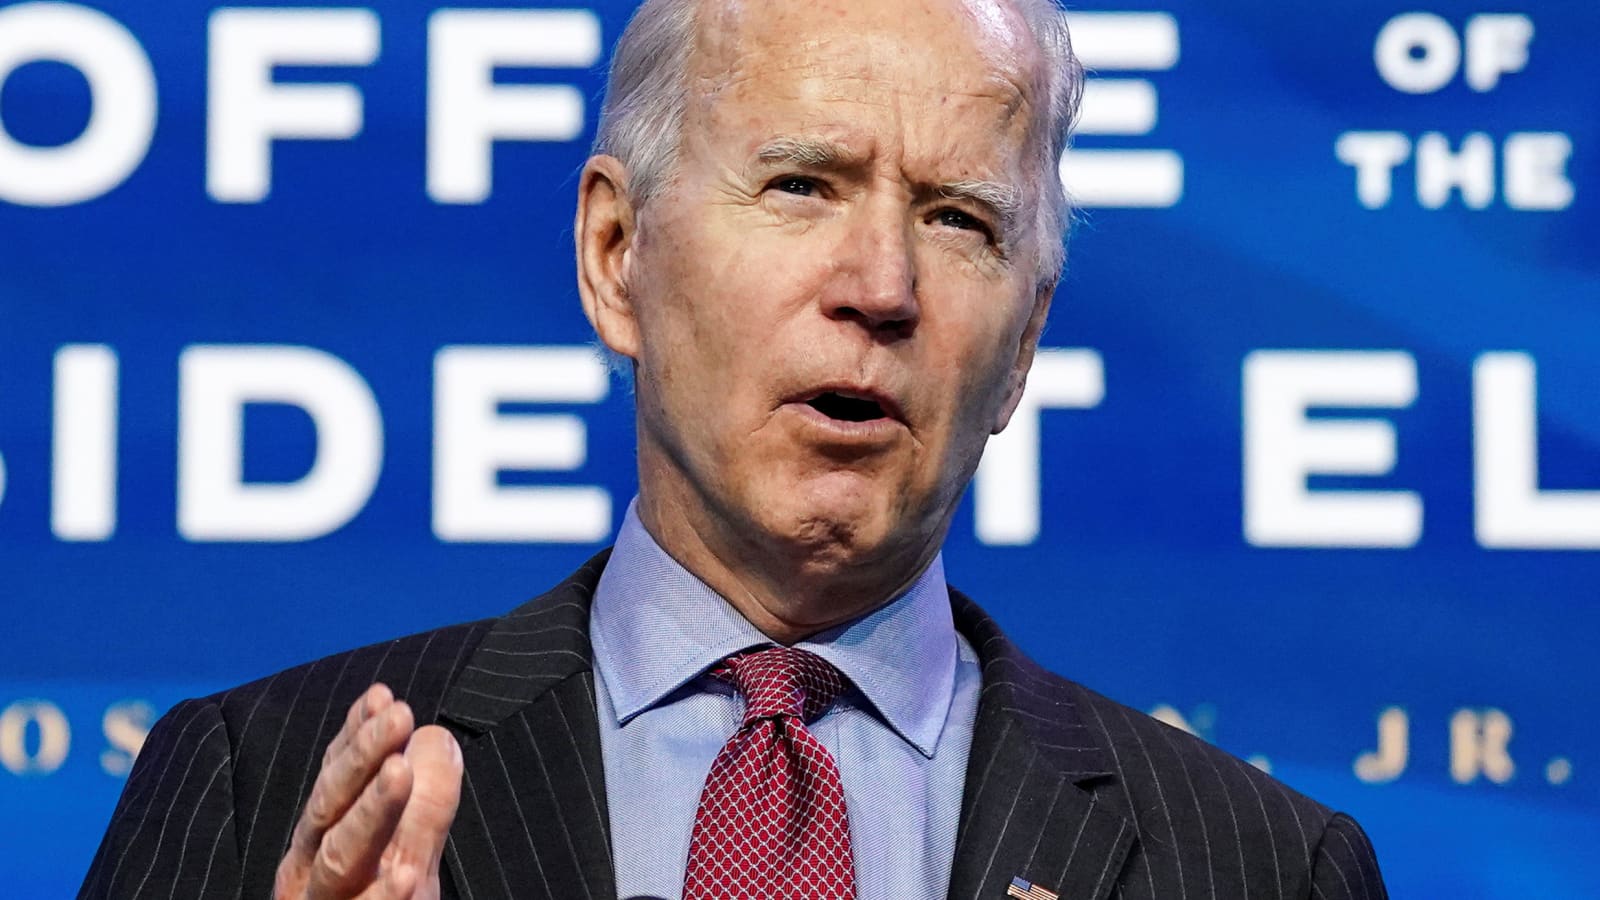 Biden Hunting Down Digital Currency, but Bitcoin Seems Secure